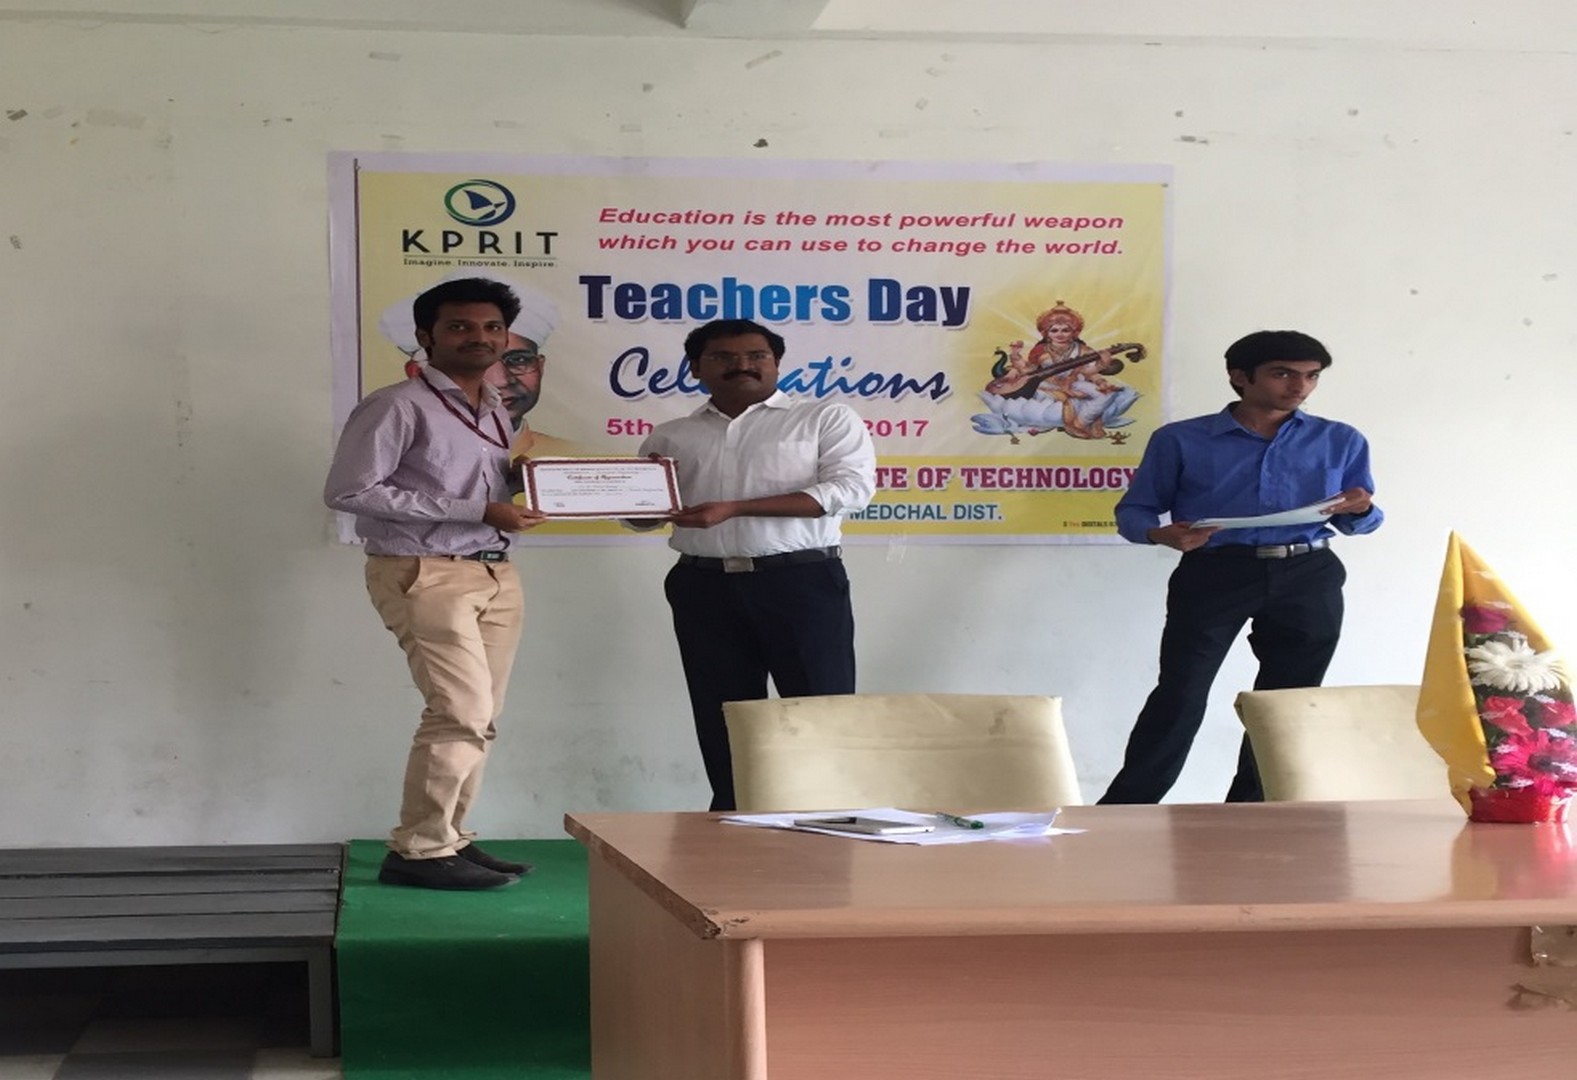 Teachers Day Events images 